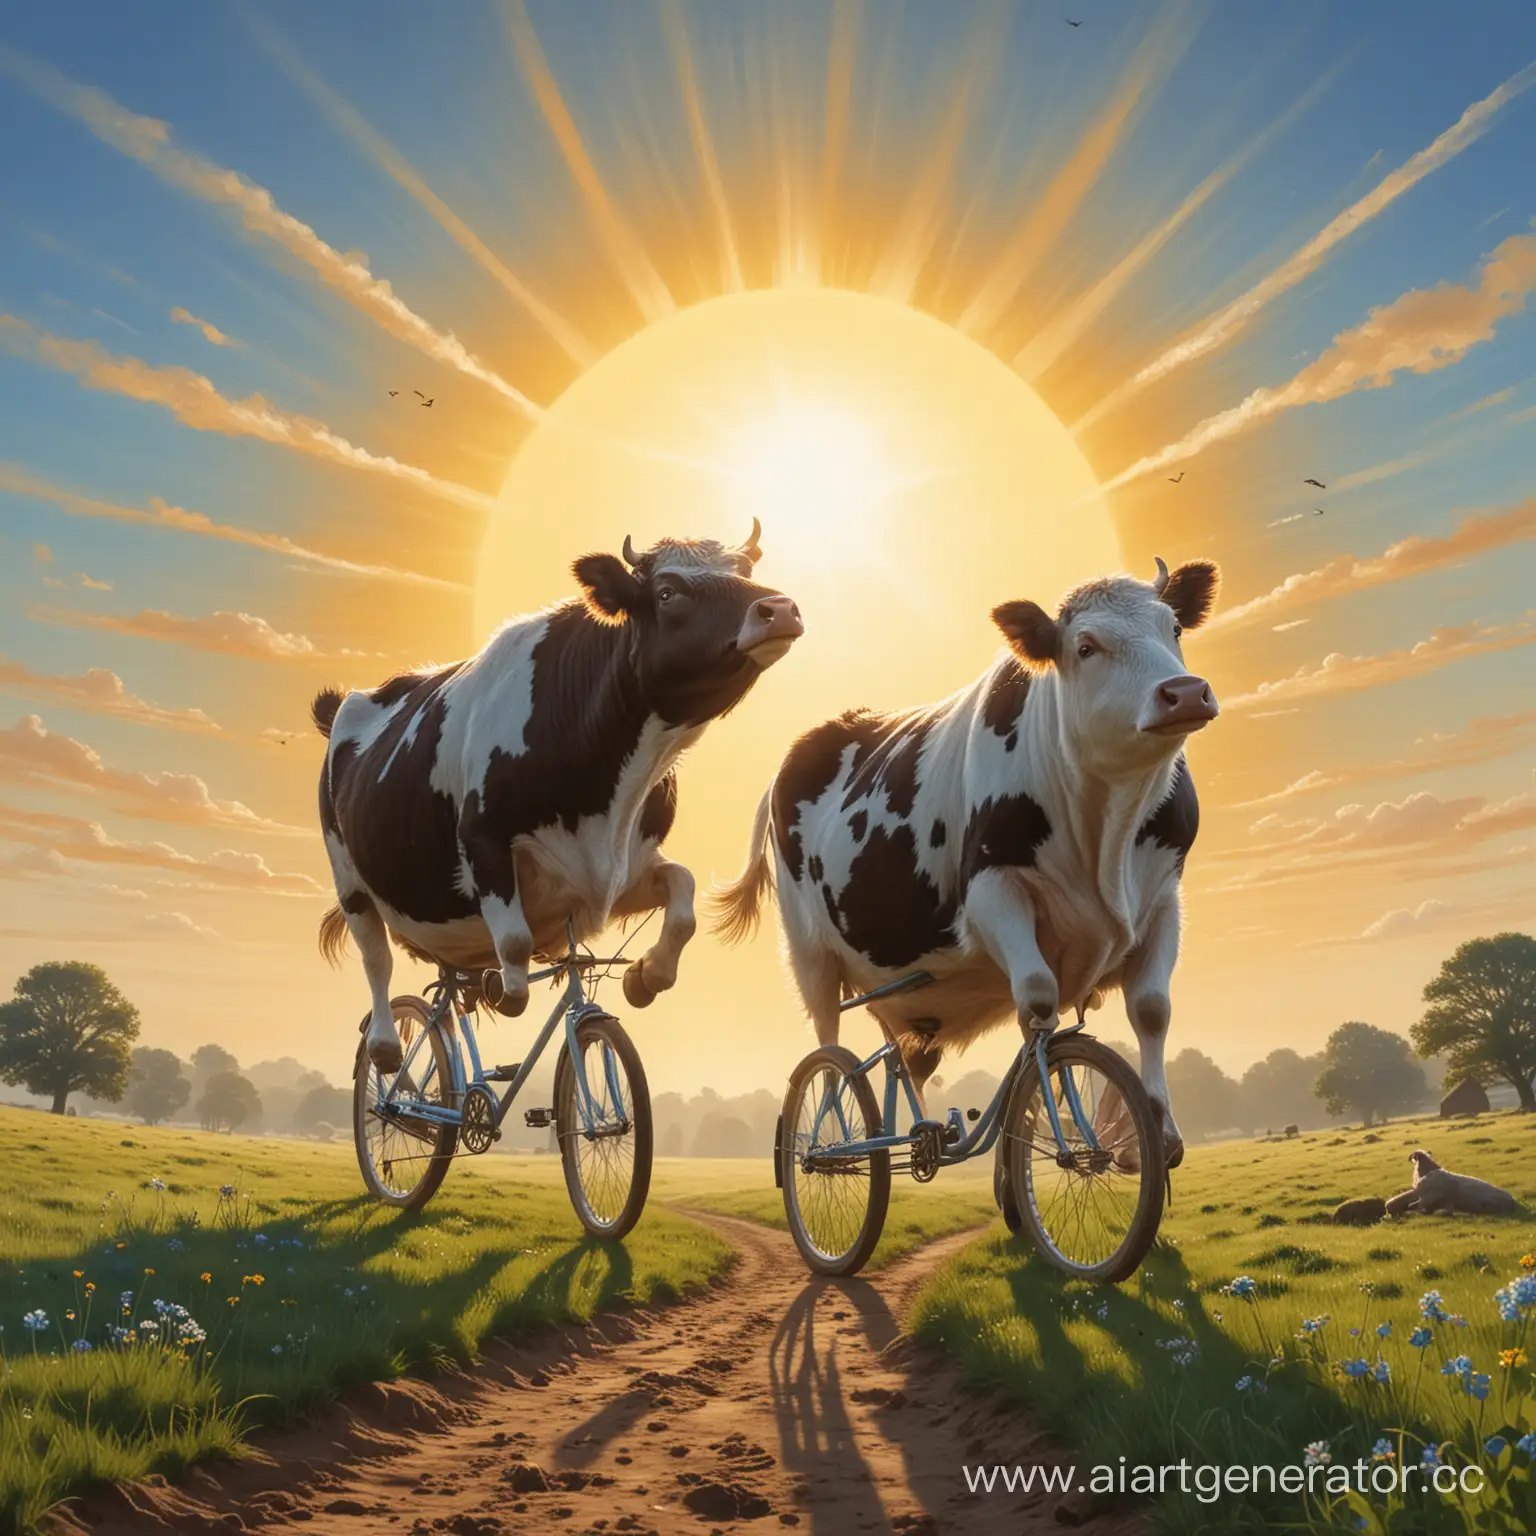 Surreal-Scene-Flying-Cows-Towards-the-Sun-with-a-Blue-Companion-and-a-Southern-Flight-with-a-Hedgehog-on-Bicycle